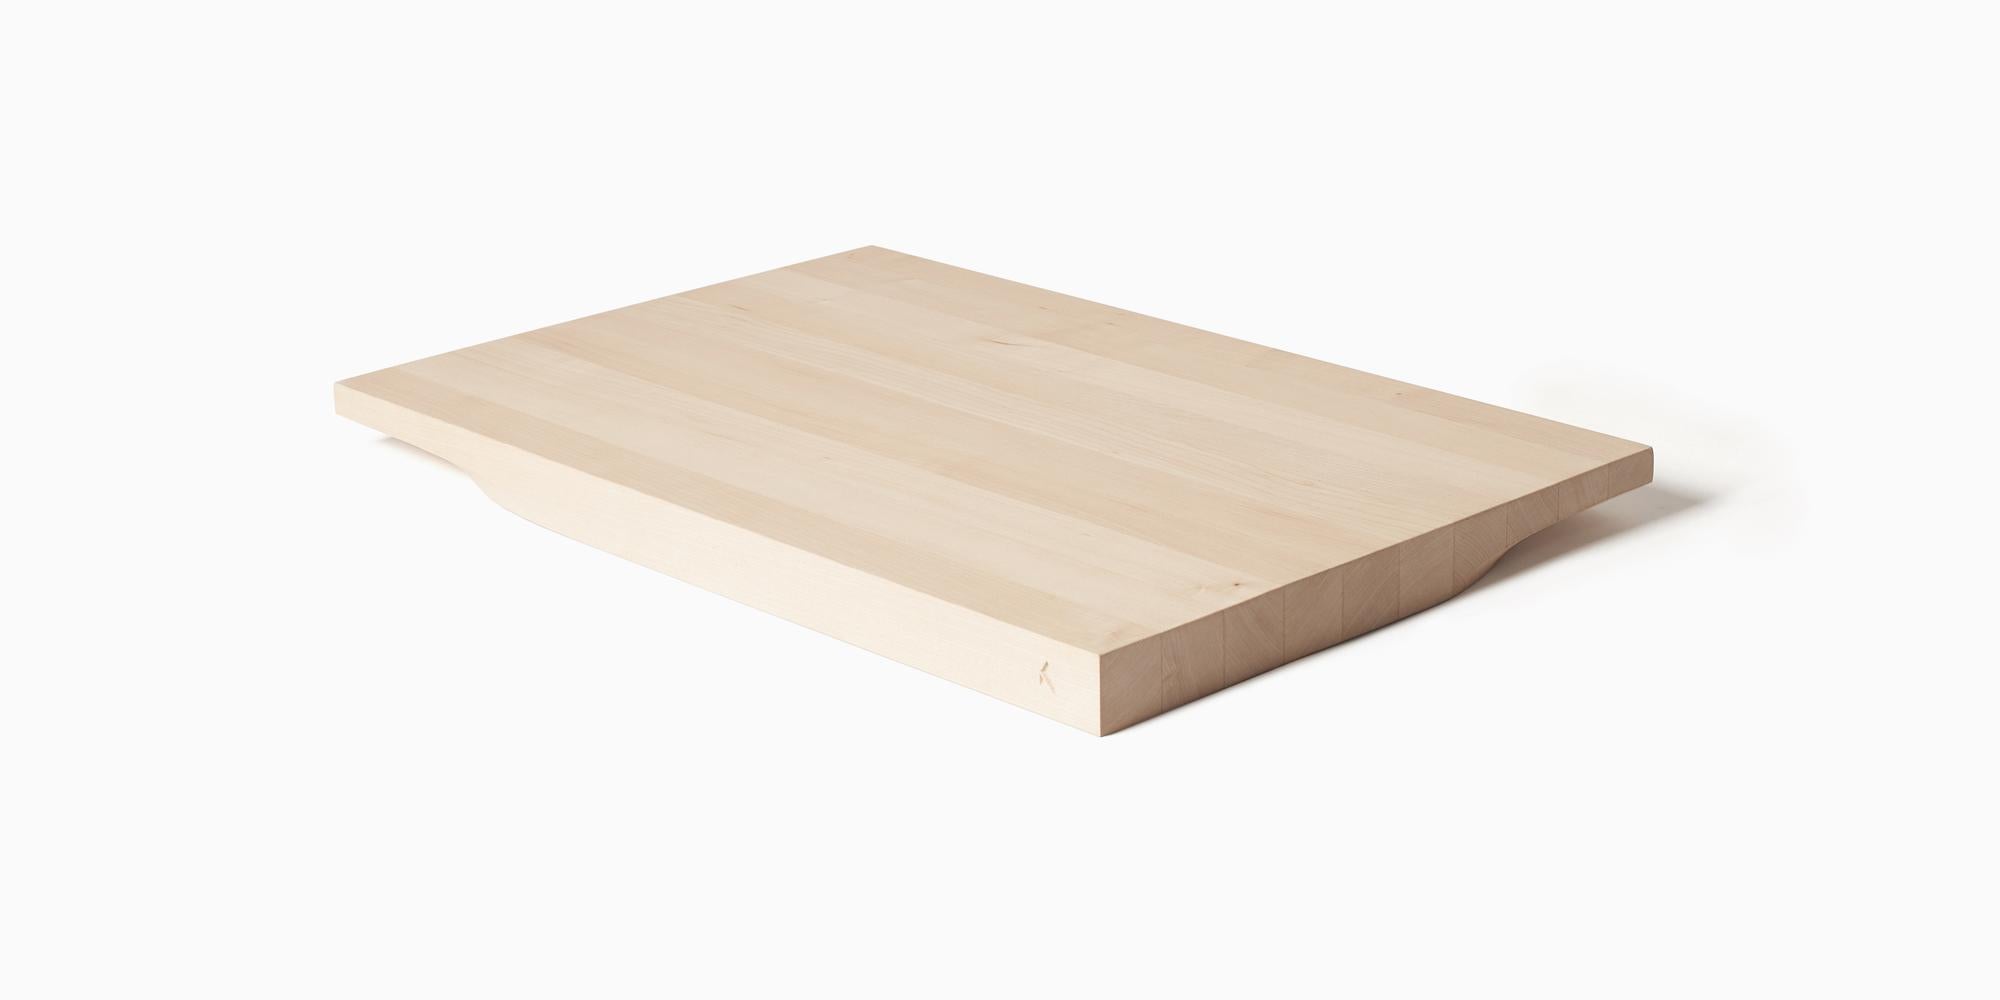 Two-sided Maple Wood Cutting Board and Serving Plate, Rettangolo, Made in Italy For Sale 1